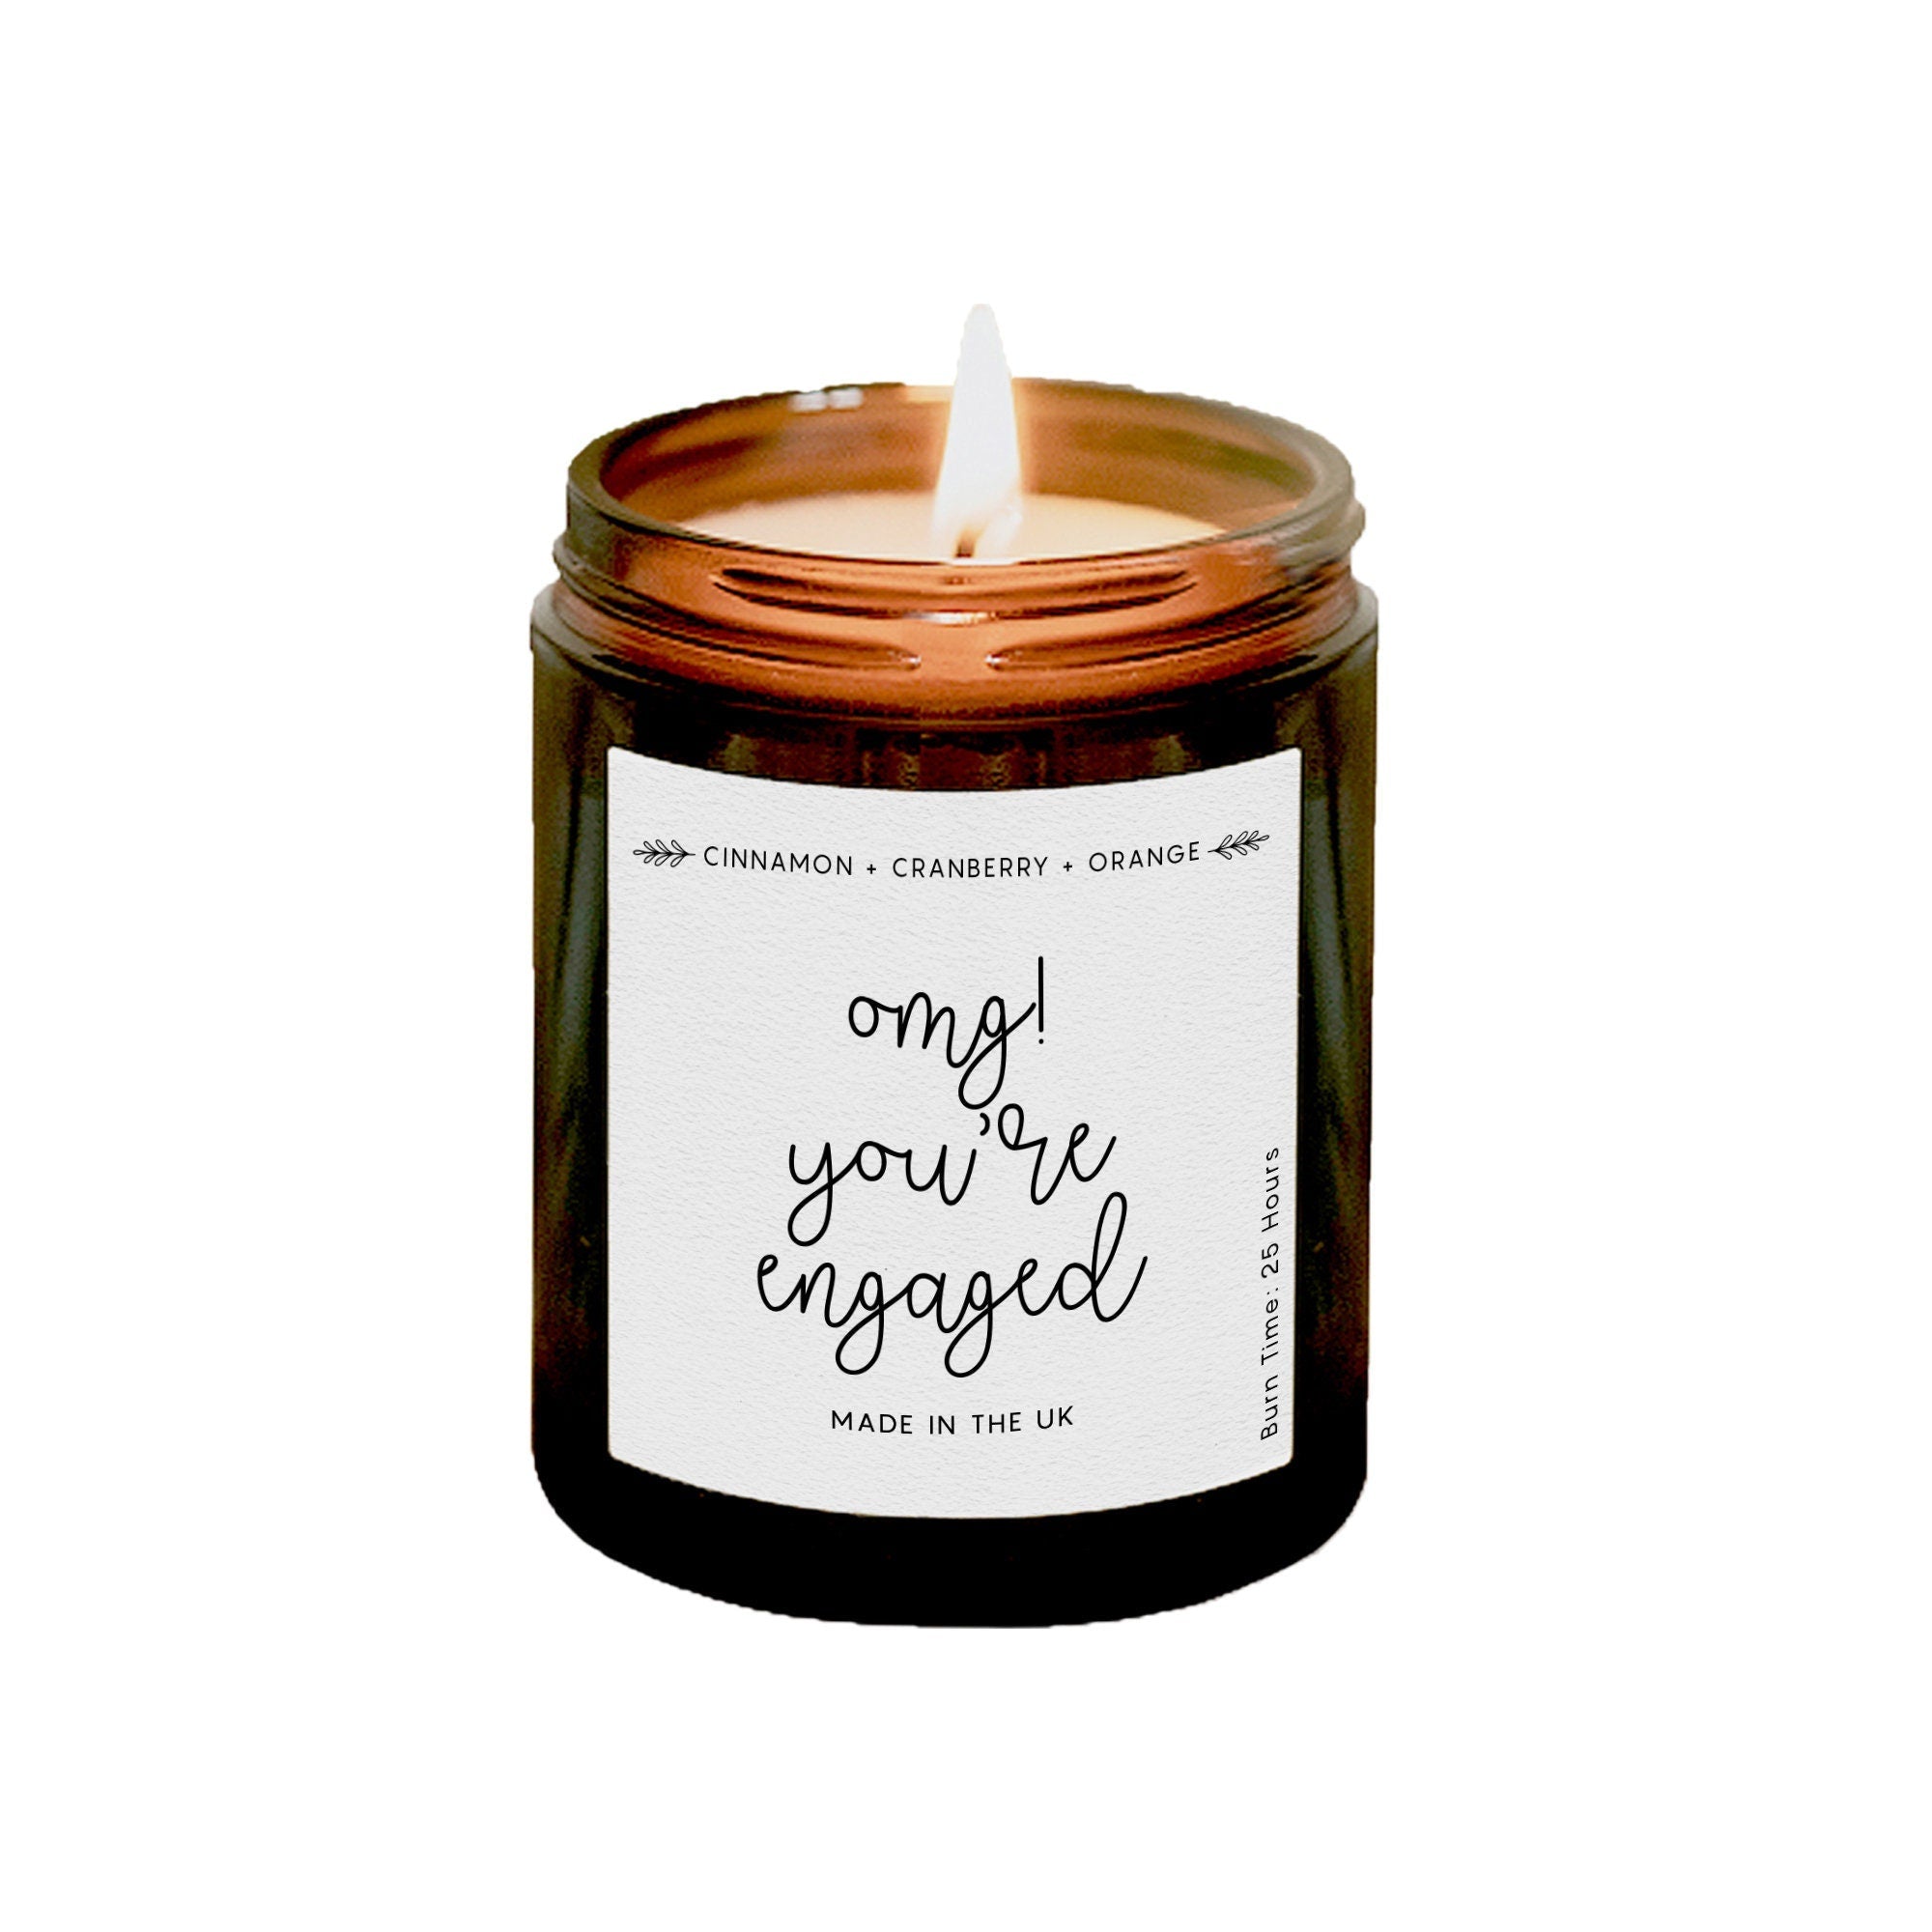 Omg! You'Re Engaged Candle, Engagement Gift, Mr Mrs Gift, Soy Wax Apothecary Candle